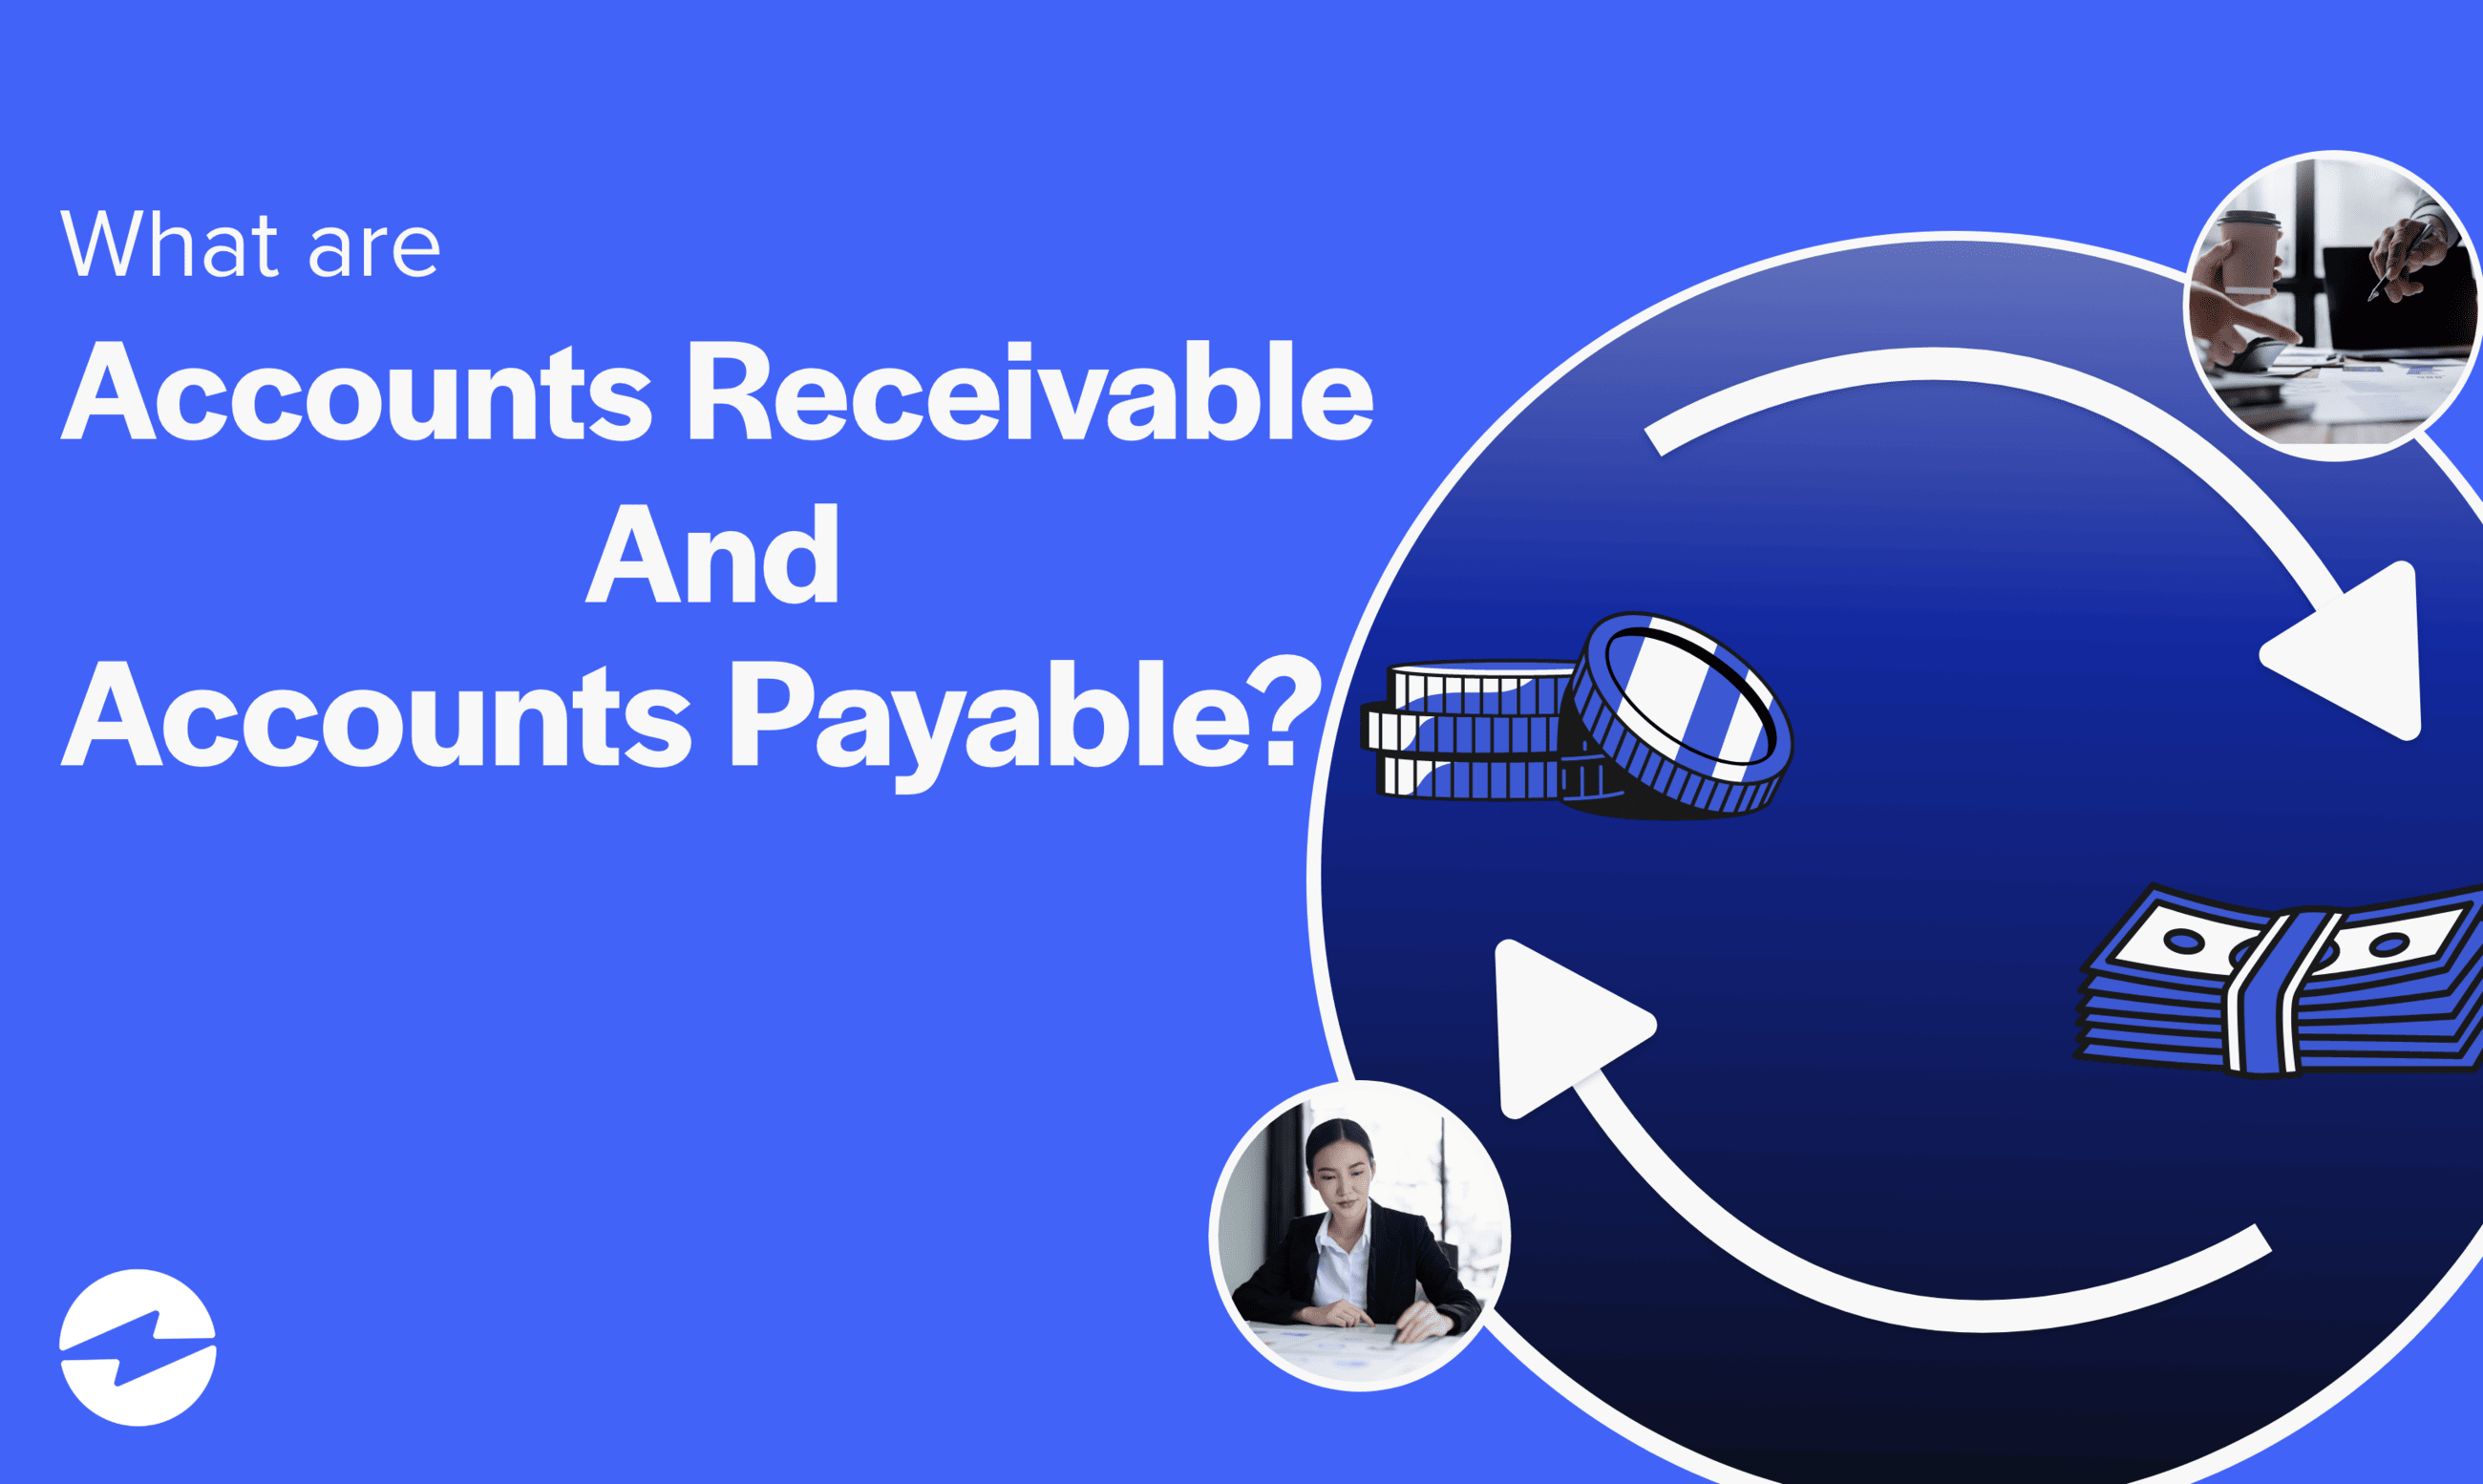 What are Accounts Receivable and Accounts Payable